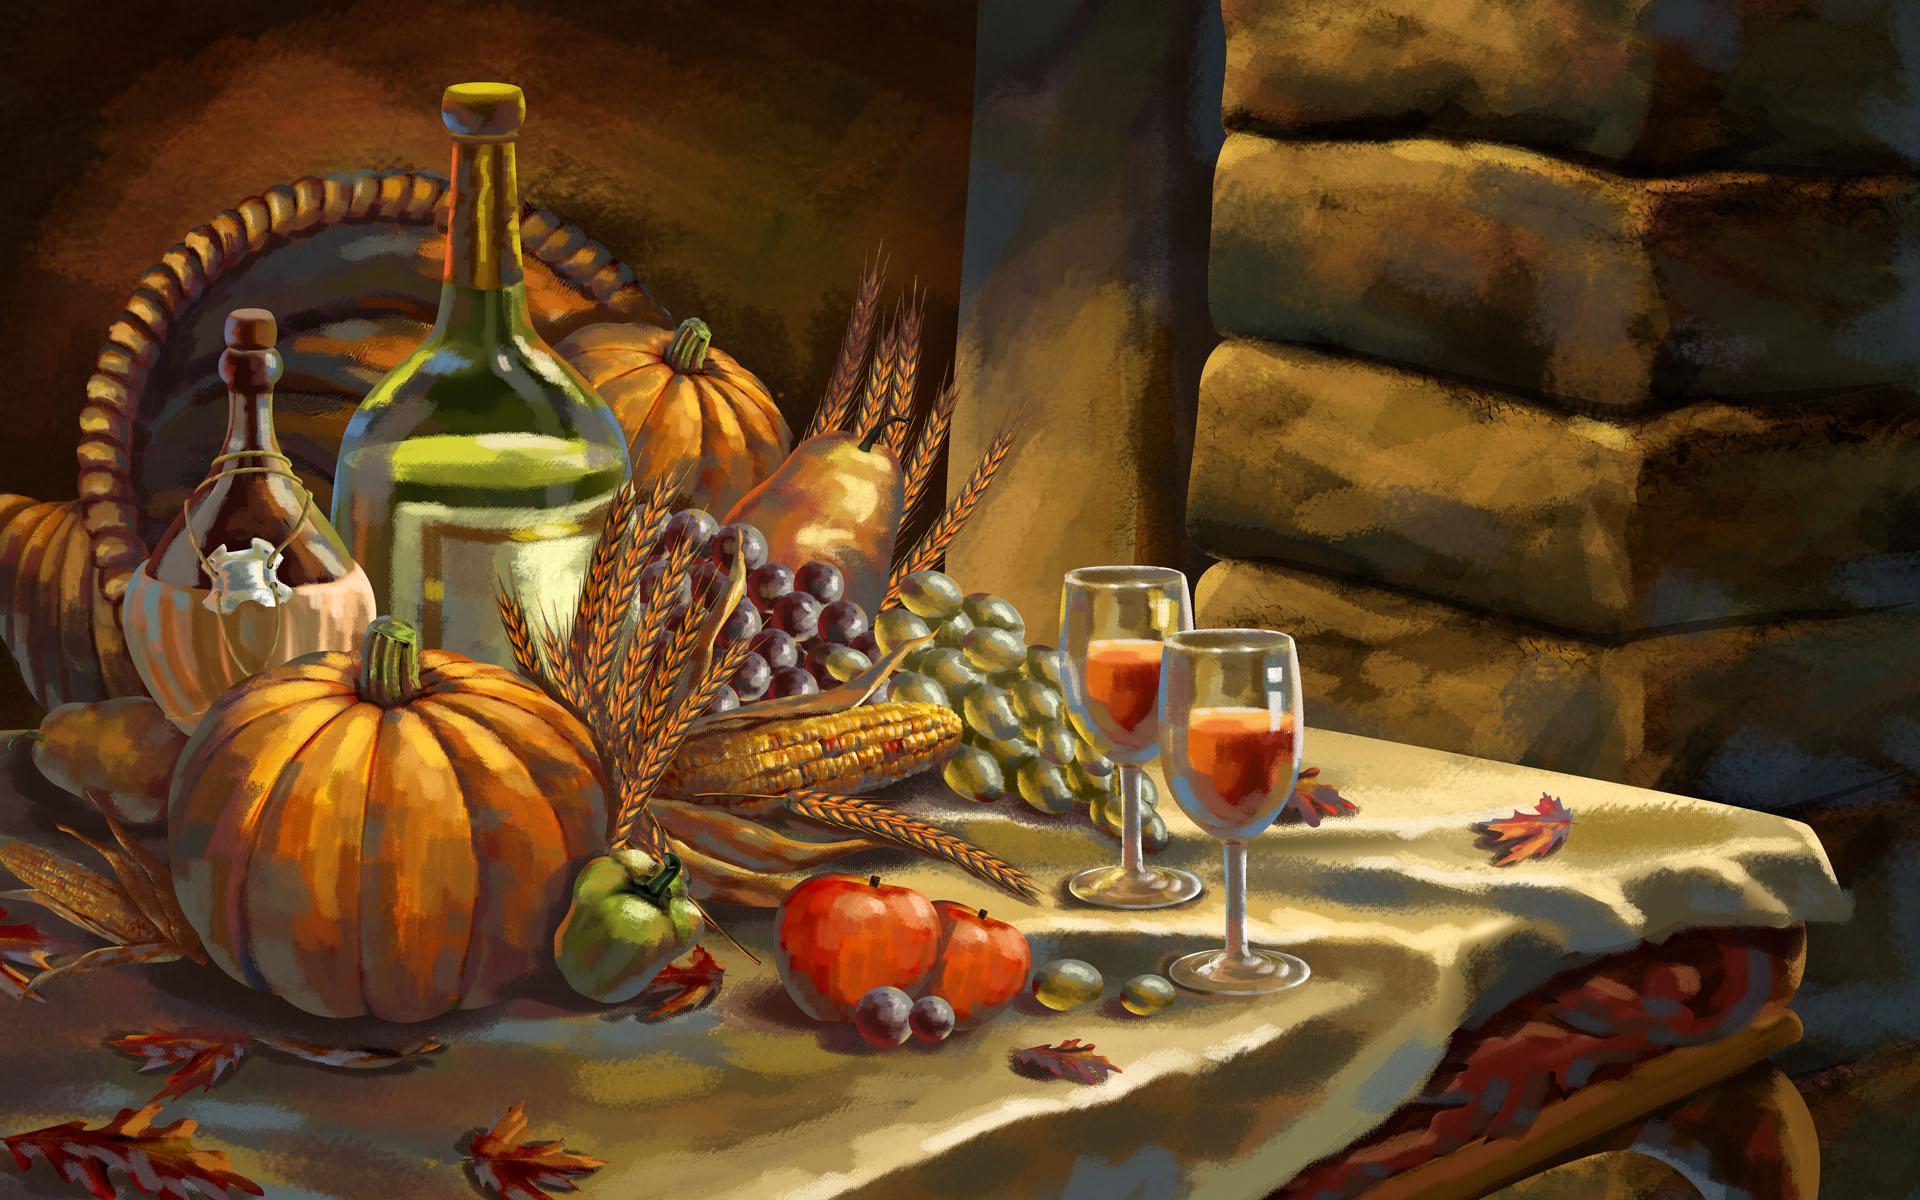 Happy Thanksgiving Wallpaper 70 images